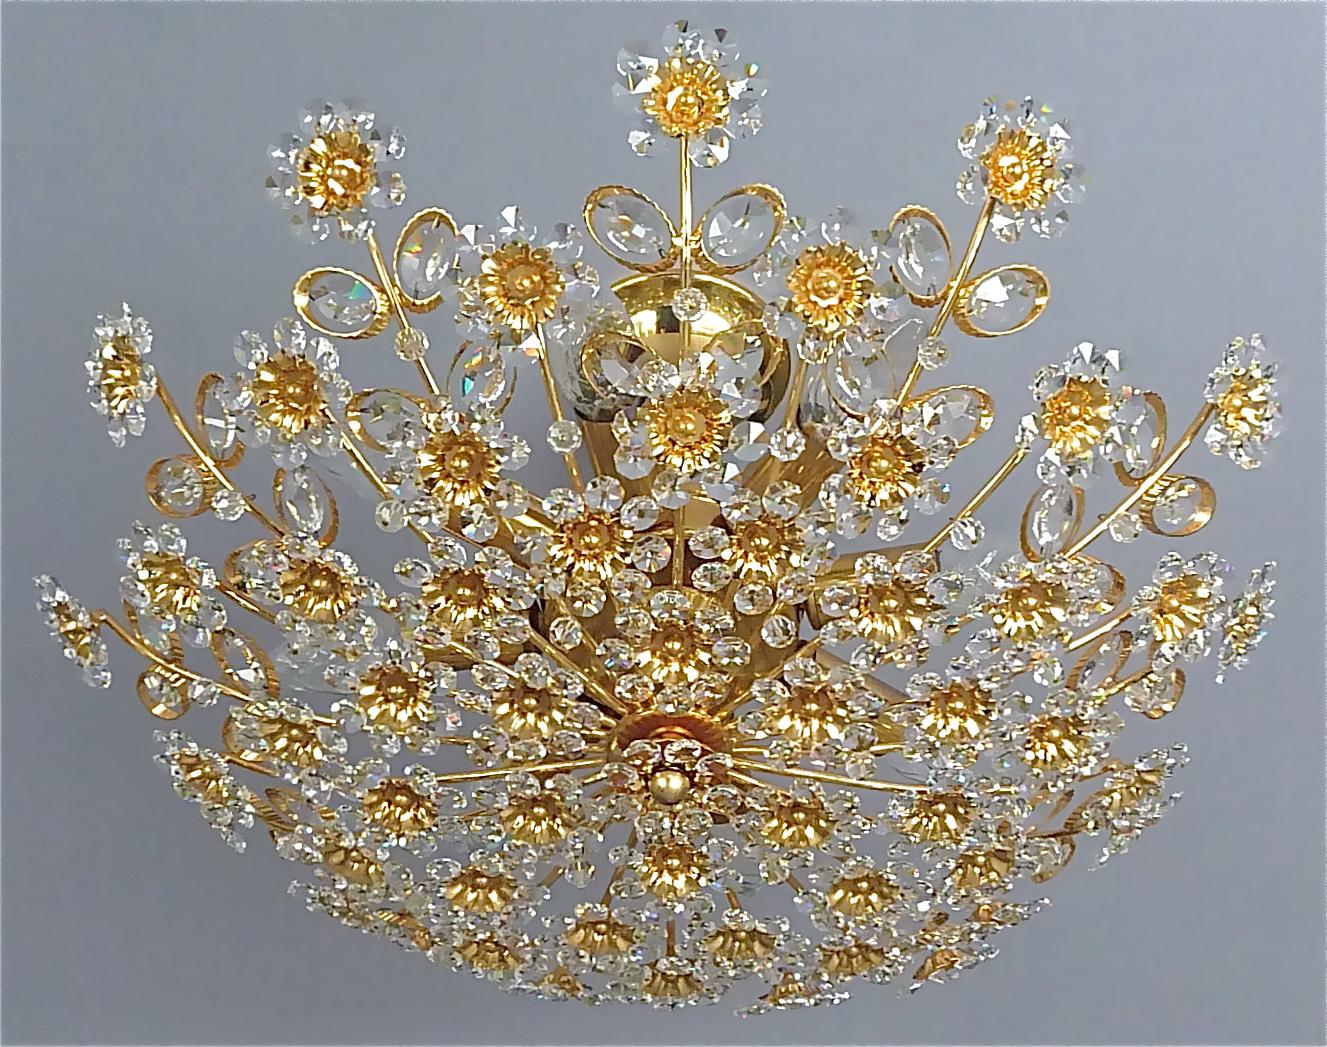 This is no.1 of 3 available.
Large round gilt brass metal crystal glass floral flush mount chandelier made by Palwa, Germany, circa 1960-1970, documented in the Palwa sales catalog, labeled with Palwa company decal with model number. The gorgeous